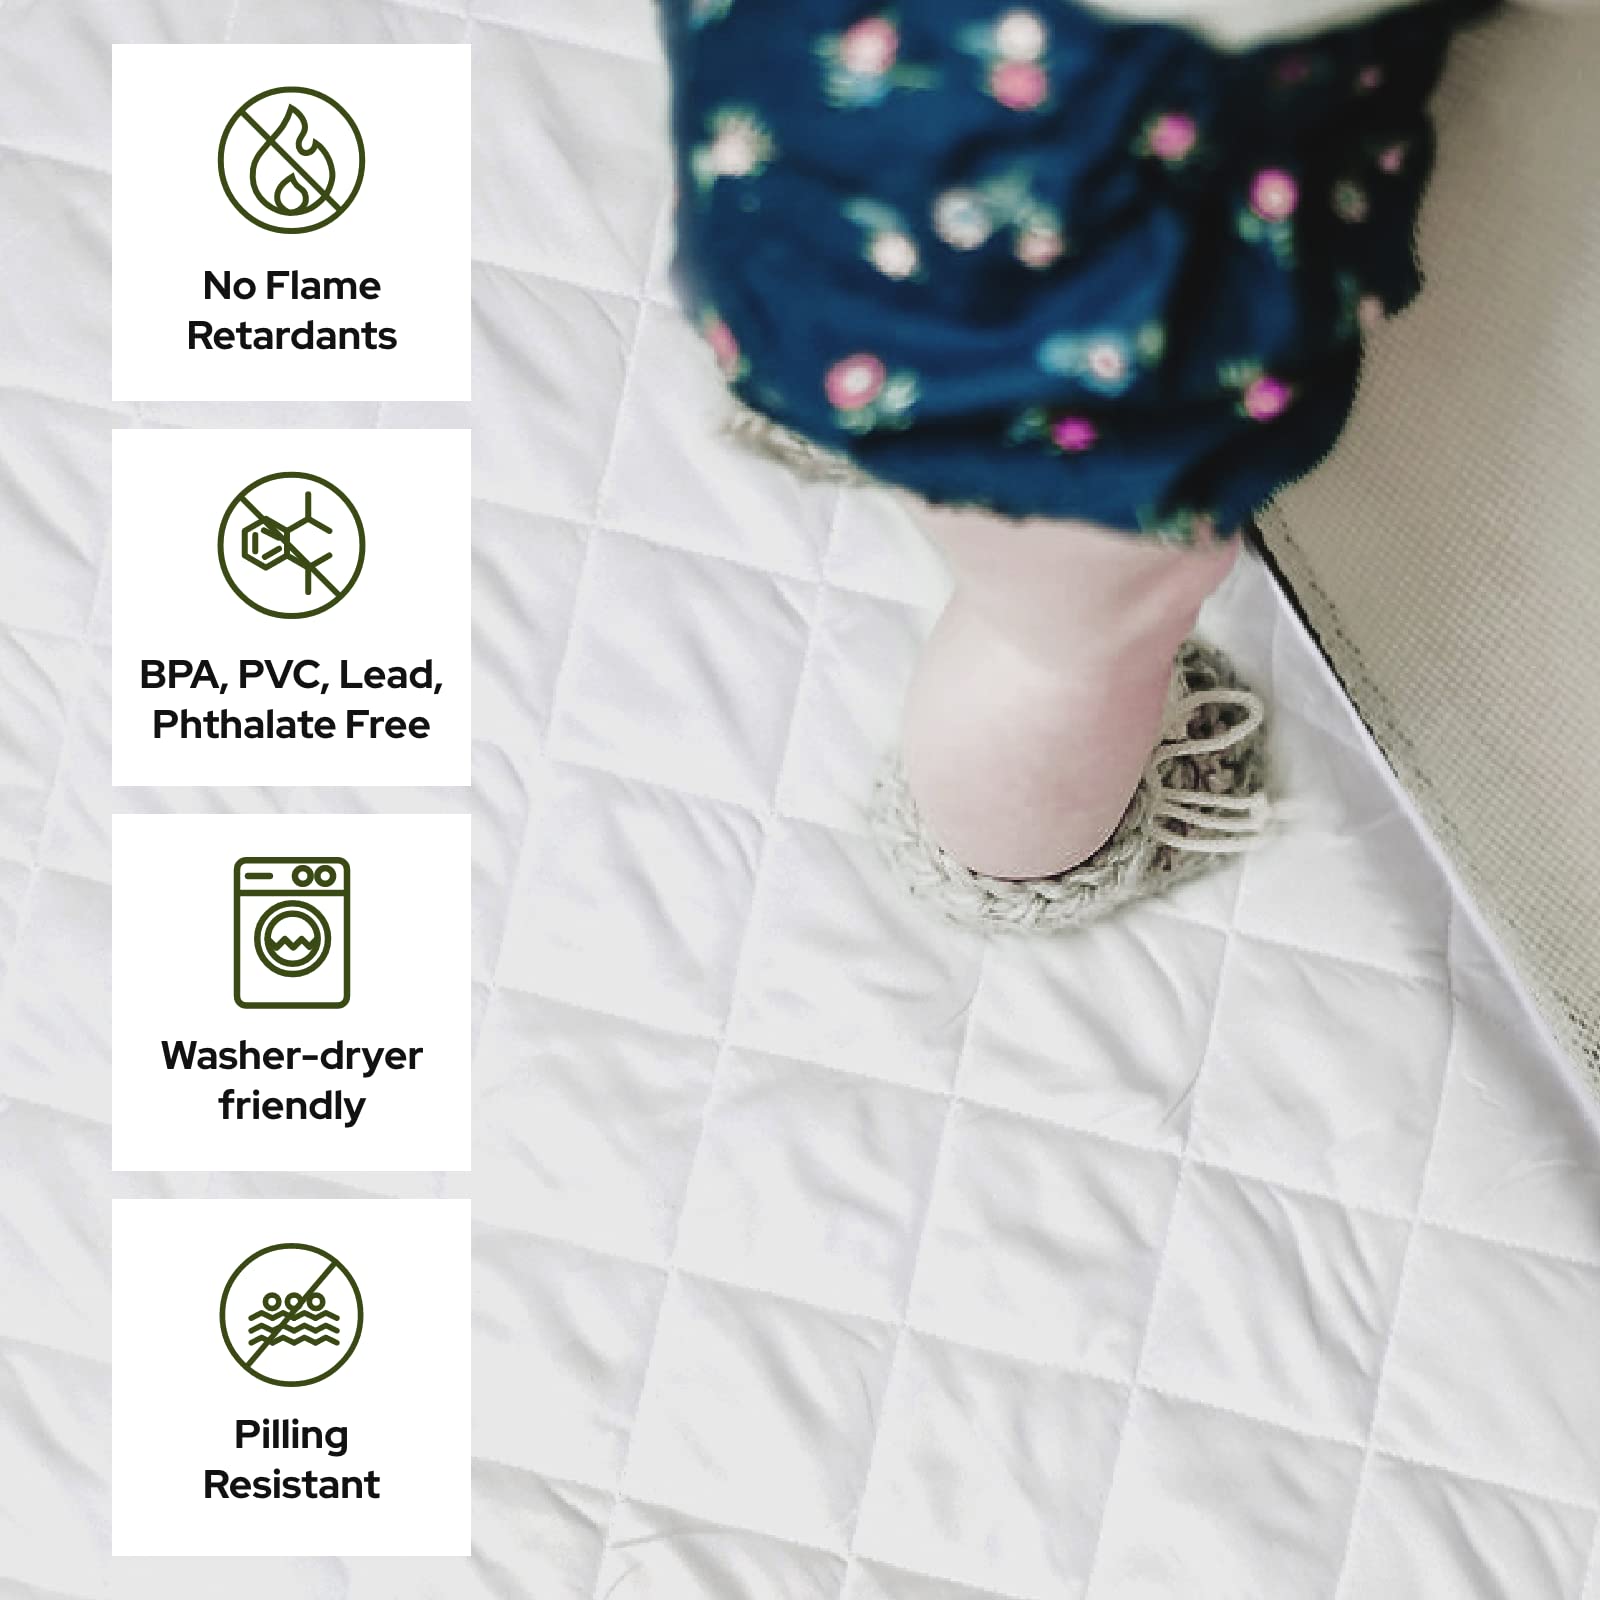 Waterproof Mini Crib Mattress Protector | Bamboo Viscose Made Ultra-Soft Quilted Mattress Cover, 1-Pack